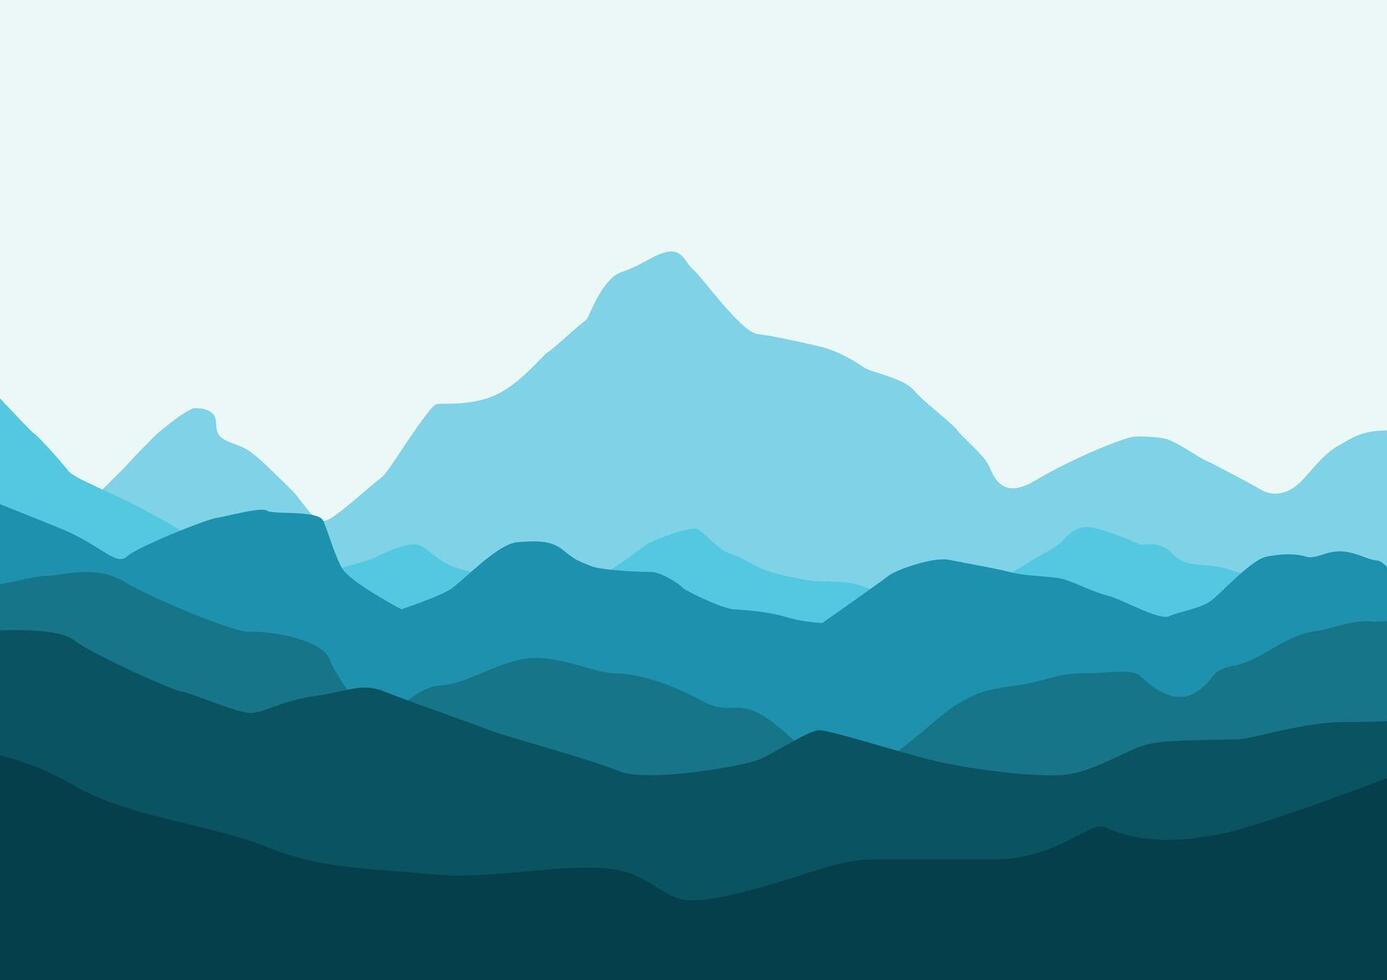 Landscape with mountains. Illustration in flat style. vector